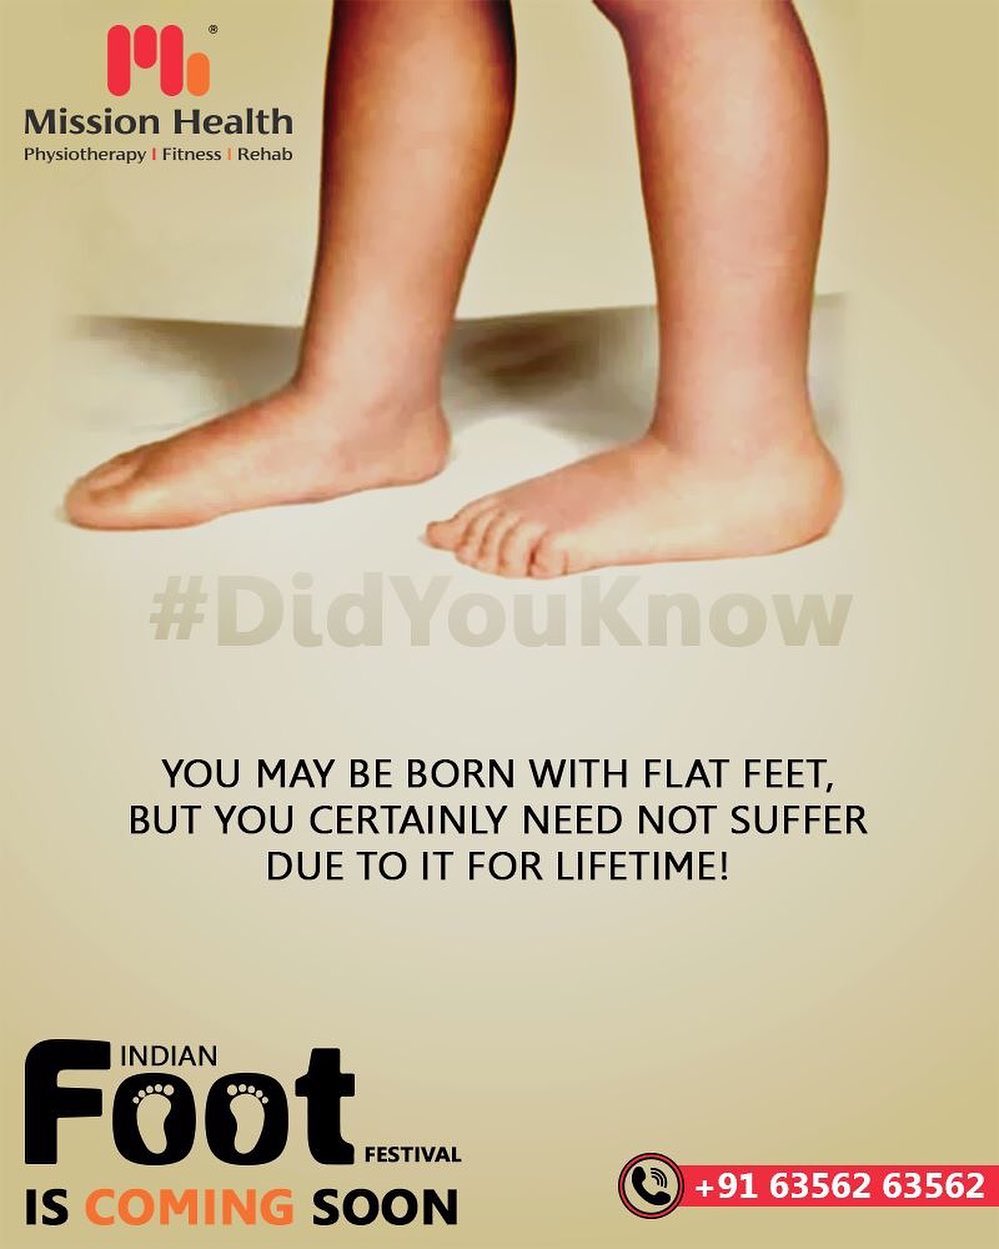 :: Did You Know:: You may be born with Flat Feet, BUT you certainly need not suffer due to it for Lifetime!

The Indian Foot Festival is coming soon... Keep Reading this space for more updates!

Call: +916356263562
Visit: www.missionhealth.co.in

#IndianFootFestival #ComingSoon #FootClinic #footpain #footcare #foothealth #heelpain #anklepain #flatfeet #painrelief #healthyfeet #happyfeet #MissionHealth #MissionHealthIndia #MovementIsLife